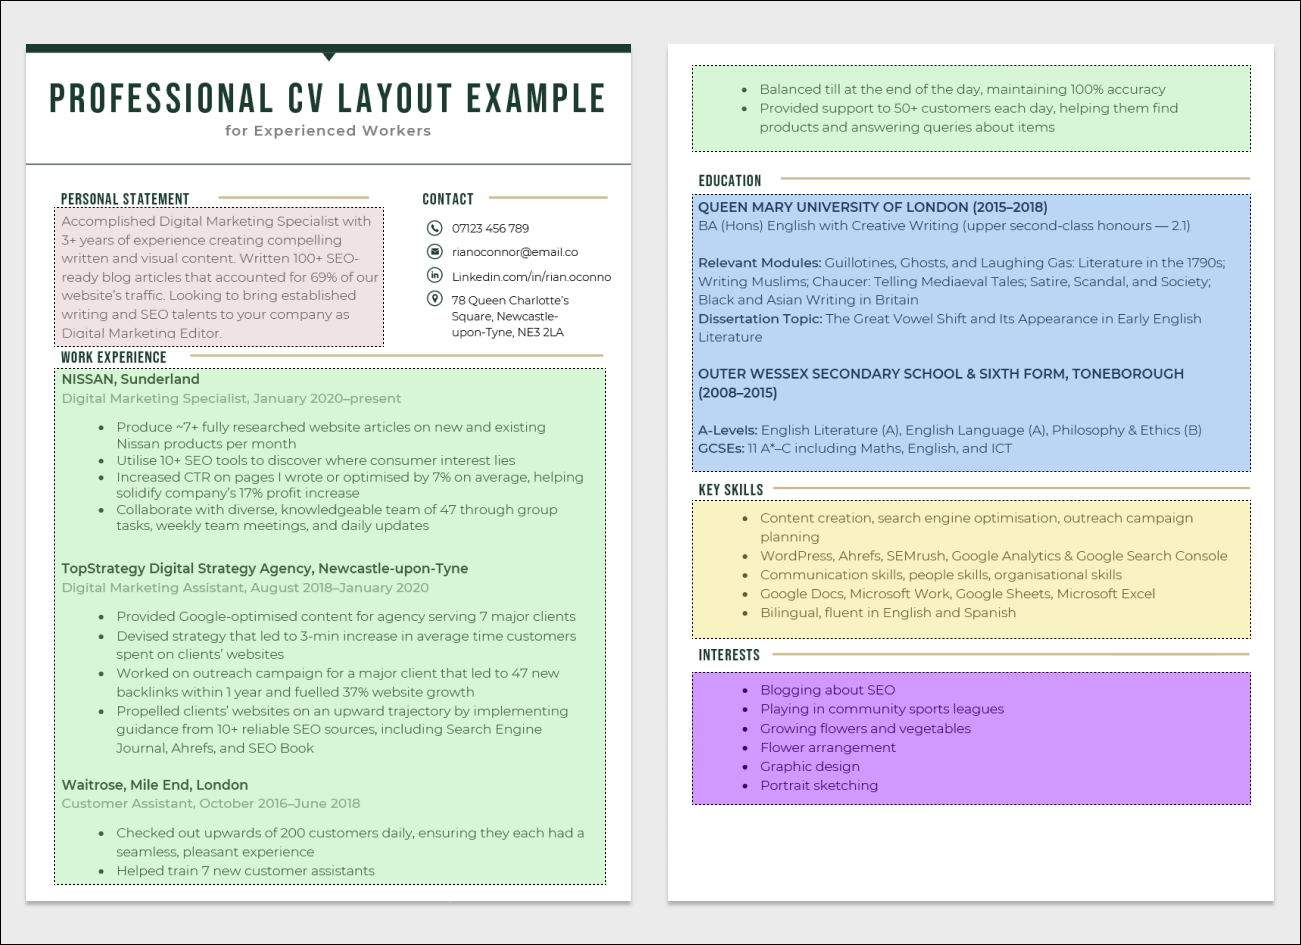 Two pages of a CV side-by-side on a light gray background to illustrate a professional CV layout